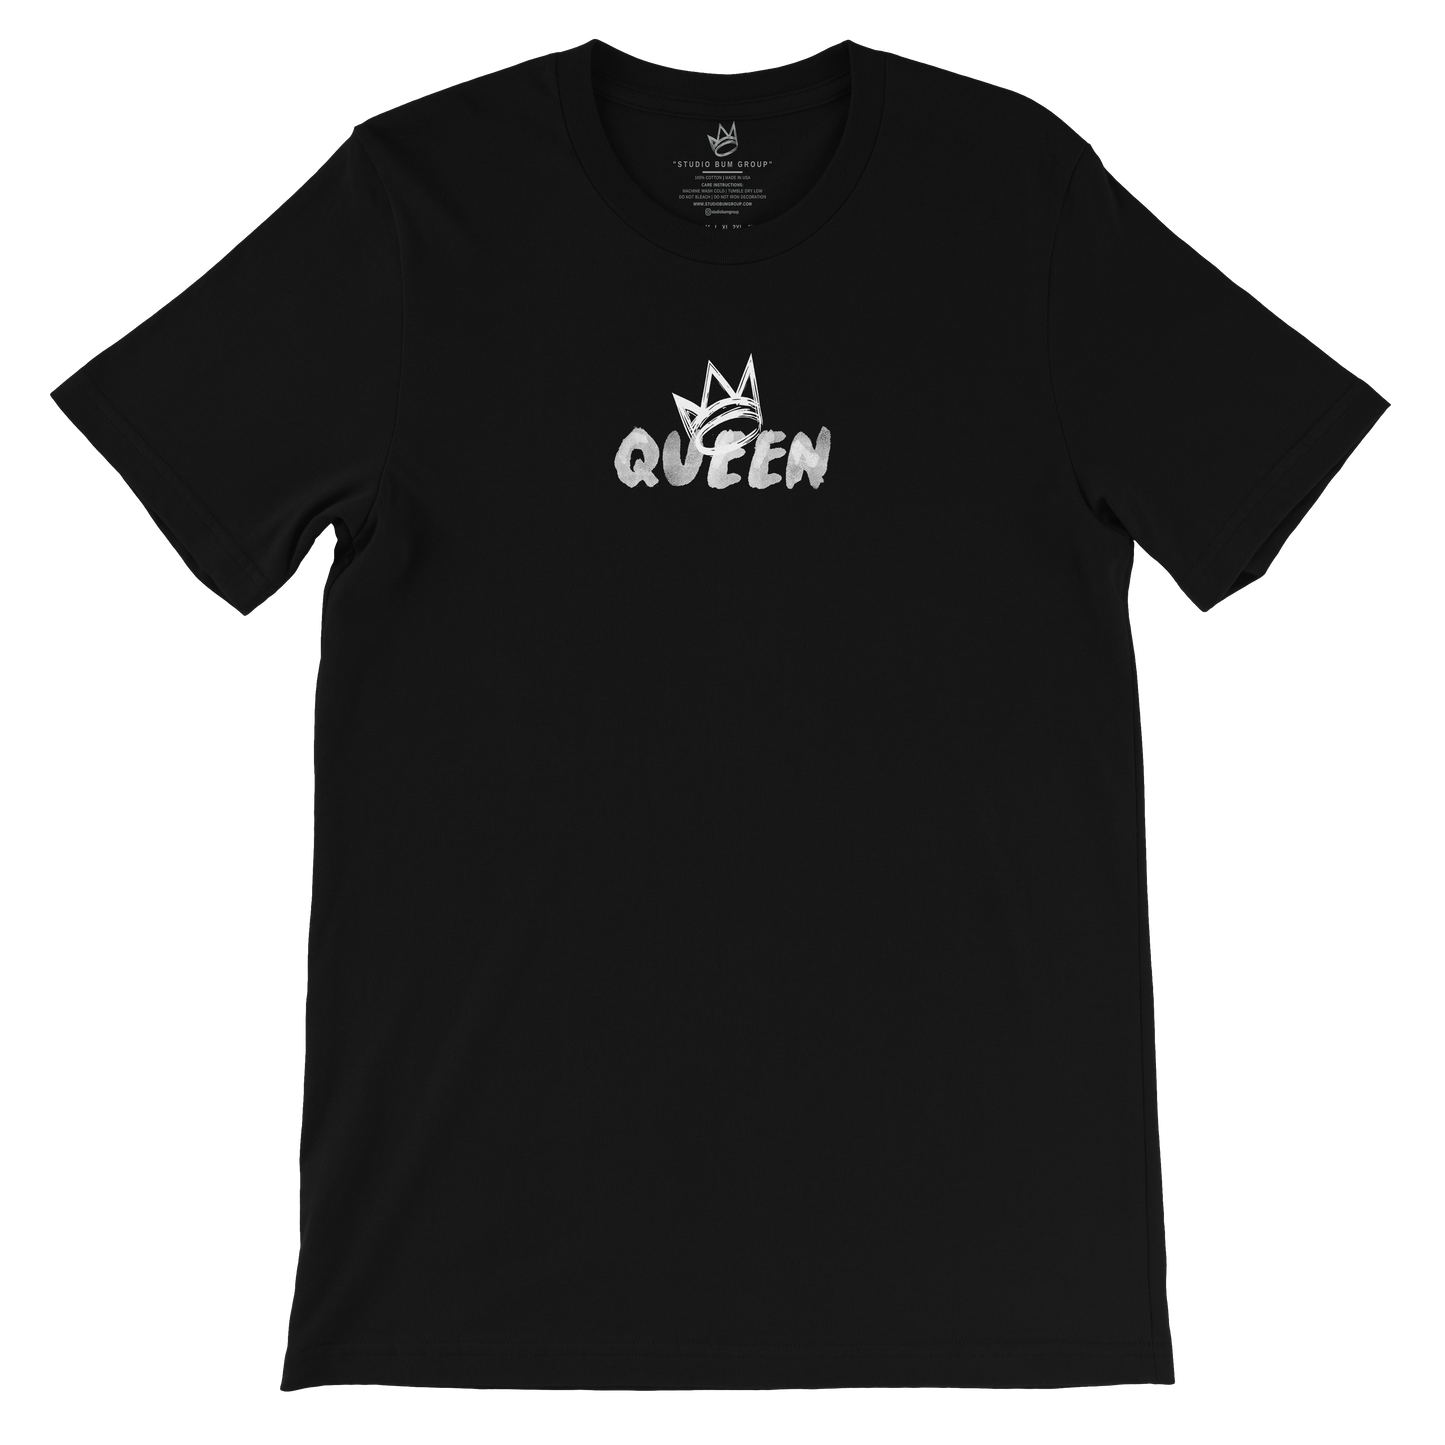 Crown Collection Queen T-Shirt (CC S2 White Print)